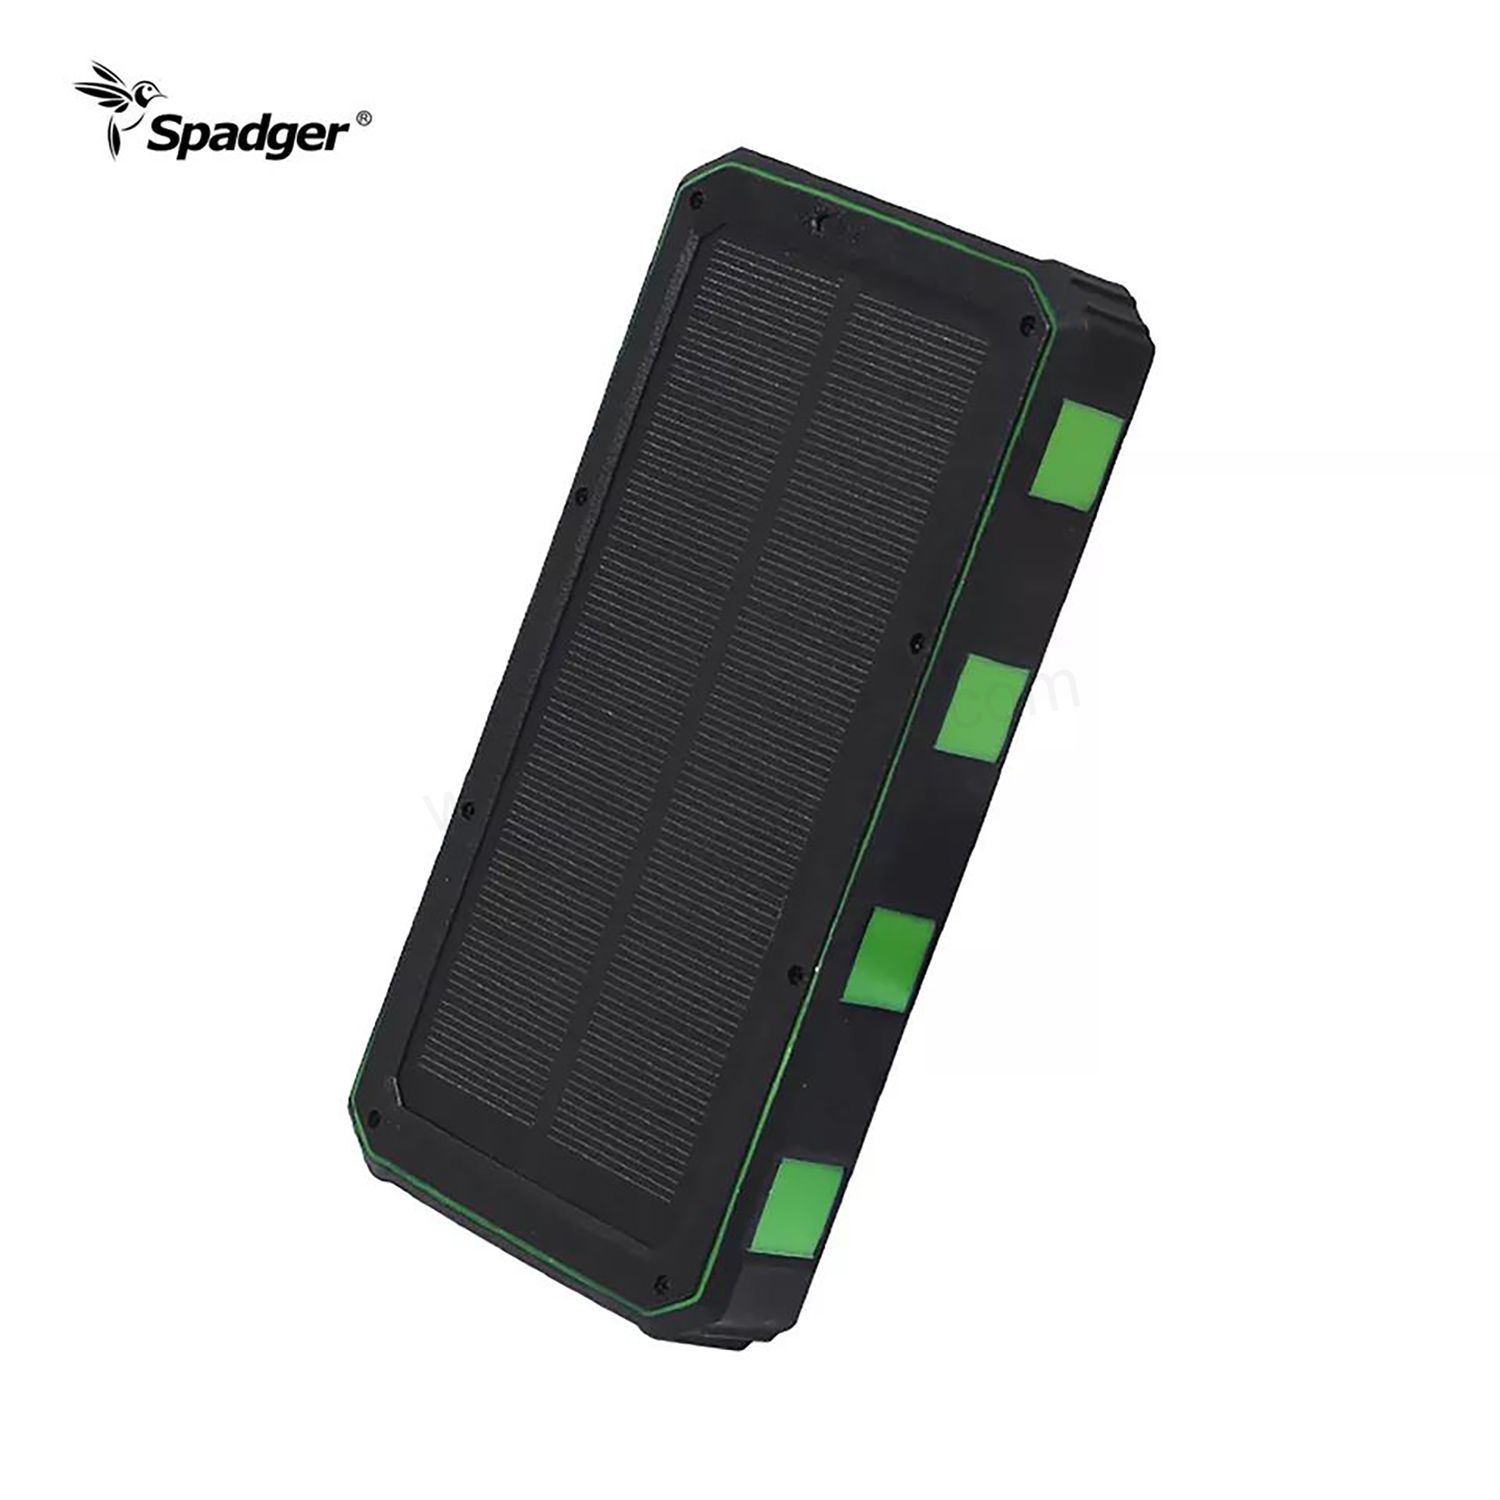 Solar Charging power bank 20000mAh solar portable charger New product solar battery bank Featured Image